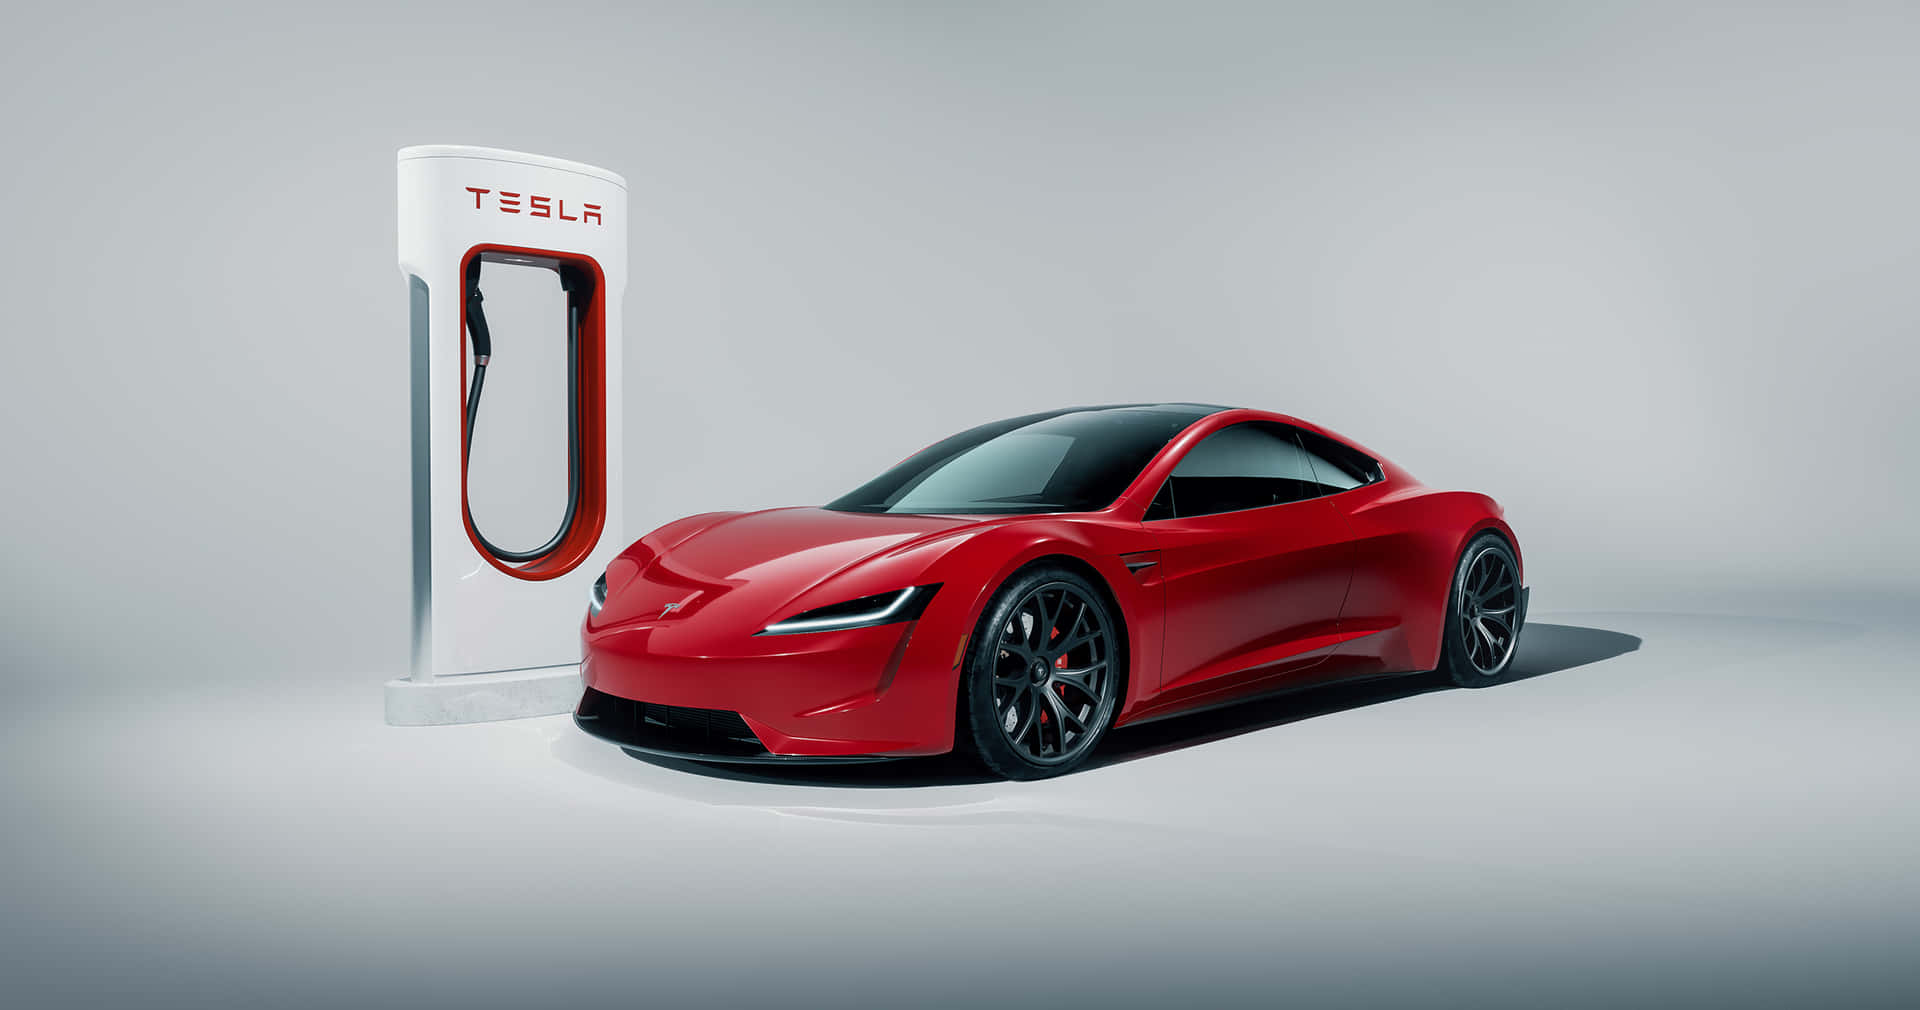 Showcase Of Sophistication And Power - The Tesla Roadster